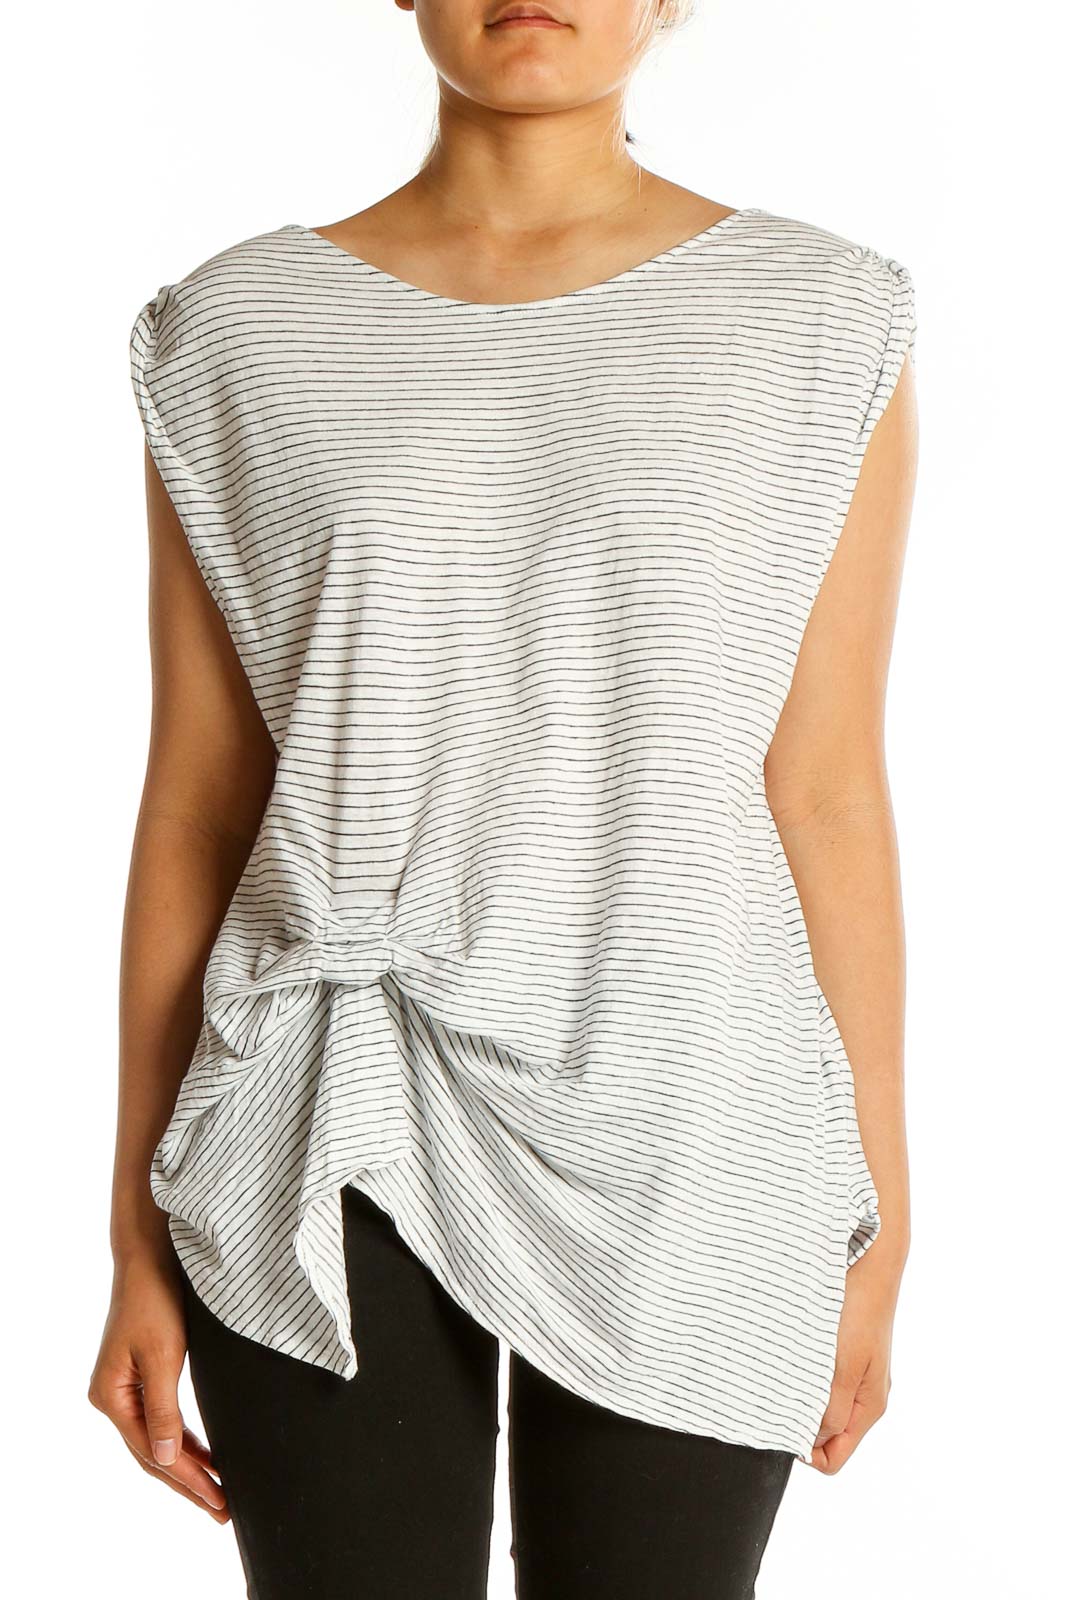 White Striped Texture Top Front